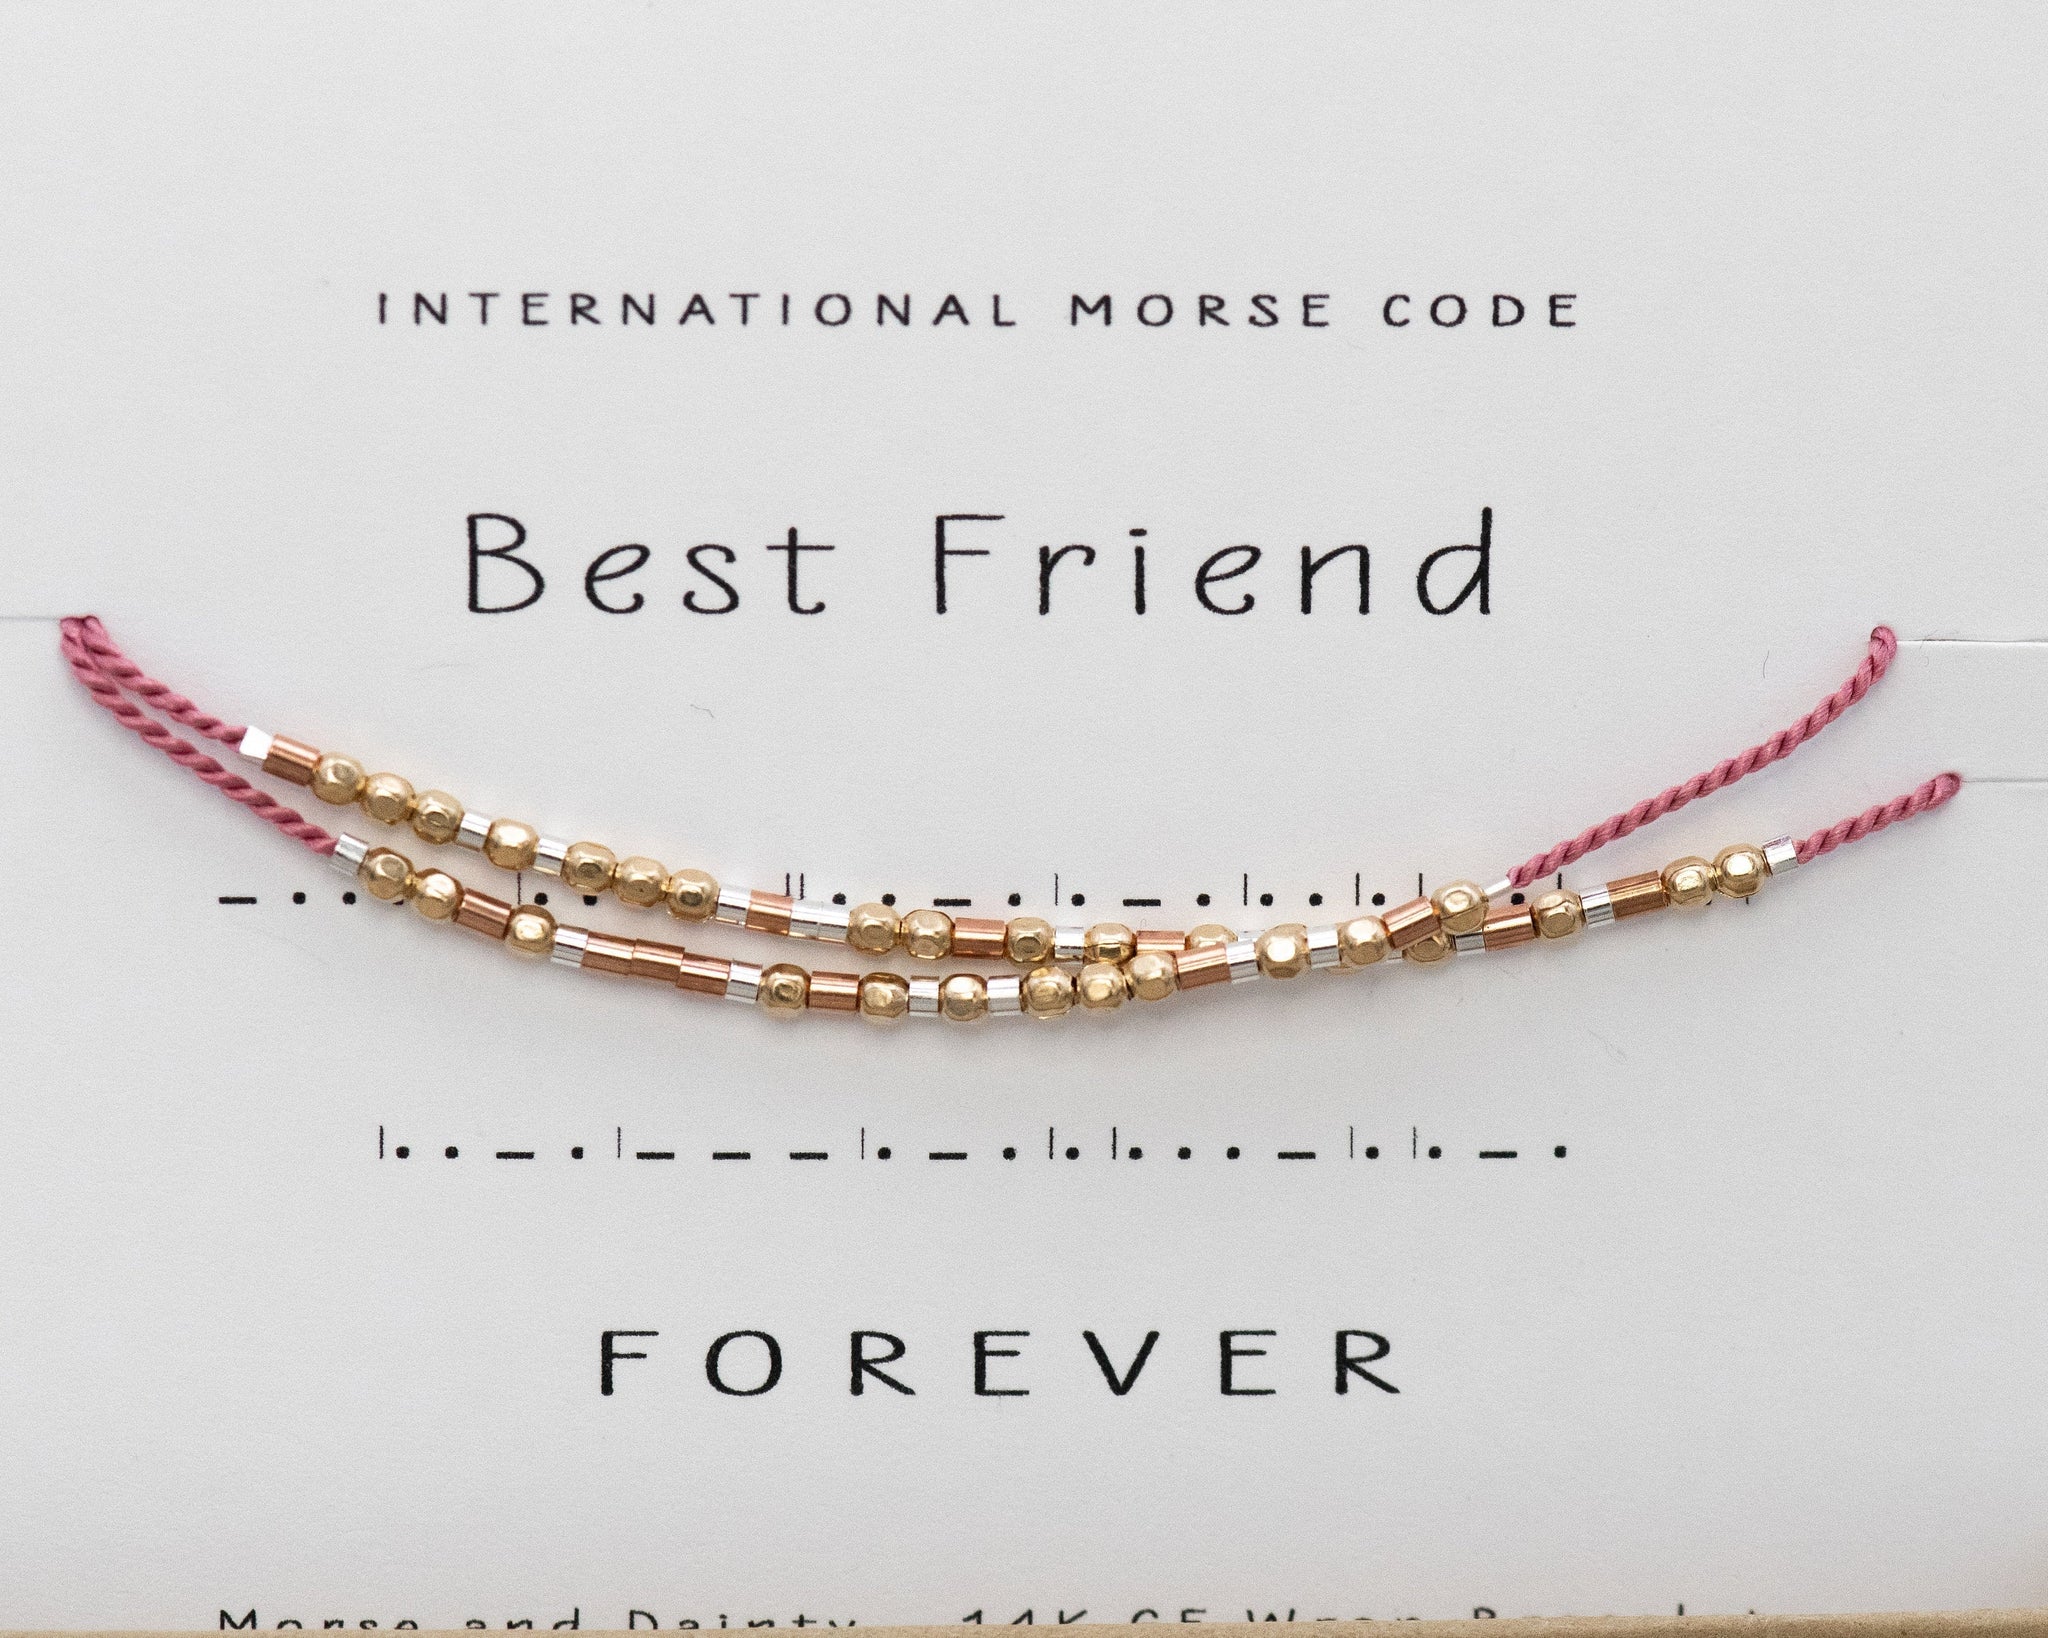 Wrap Bracelet Best Friends Forever in Morse Code Or Any Custom Phrase 35+ Letters Pink Cord or Any Color